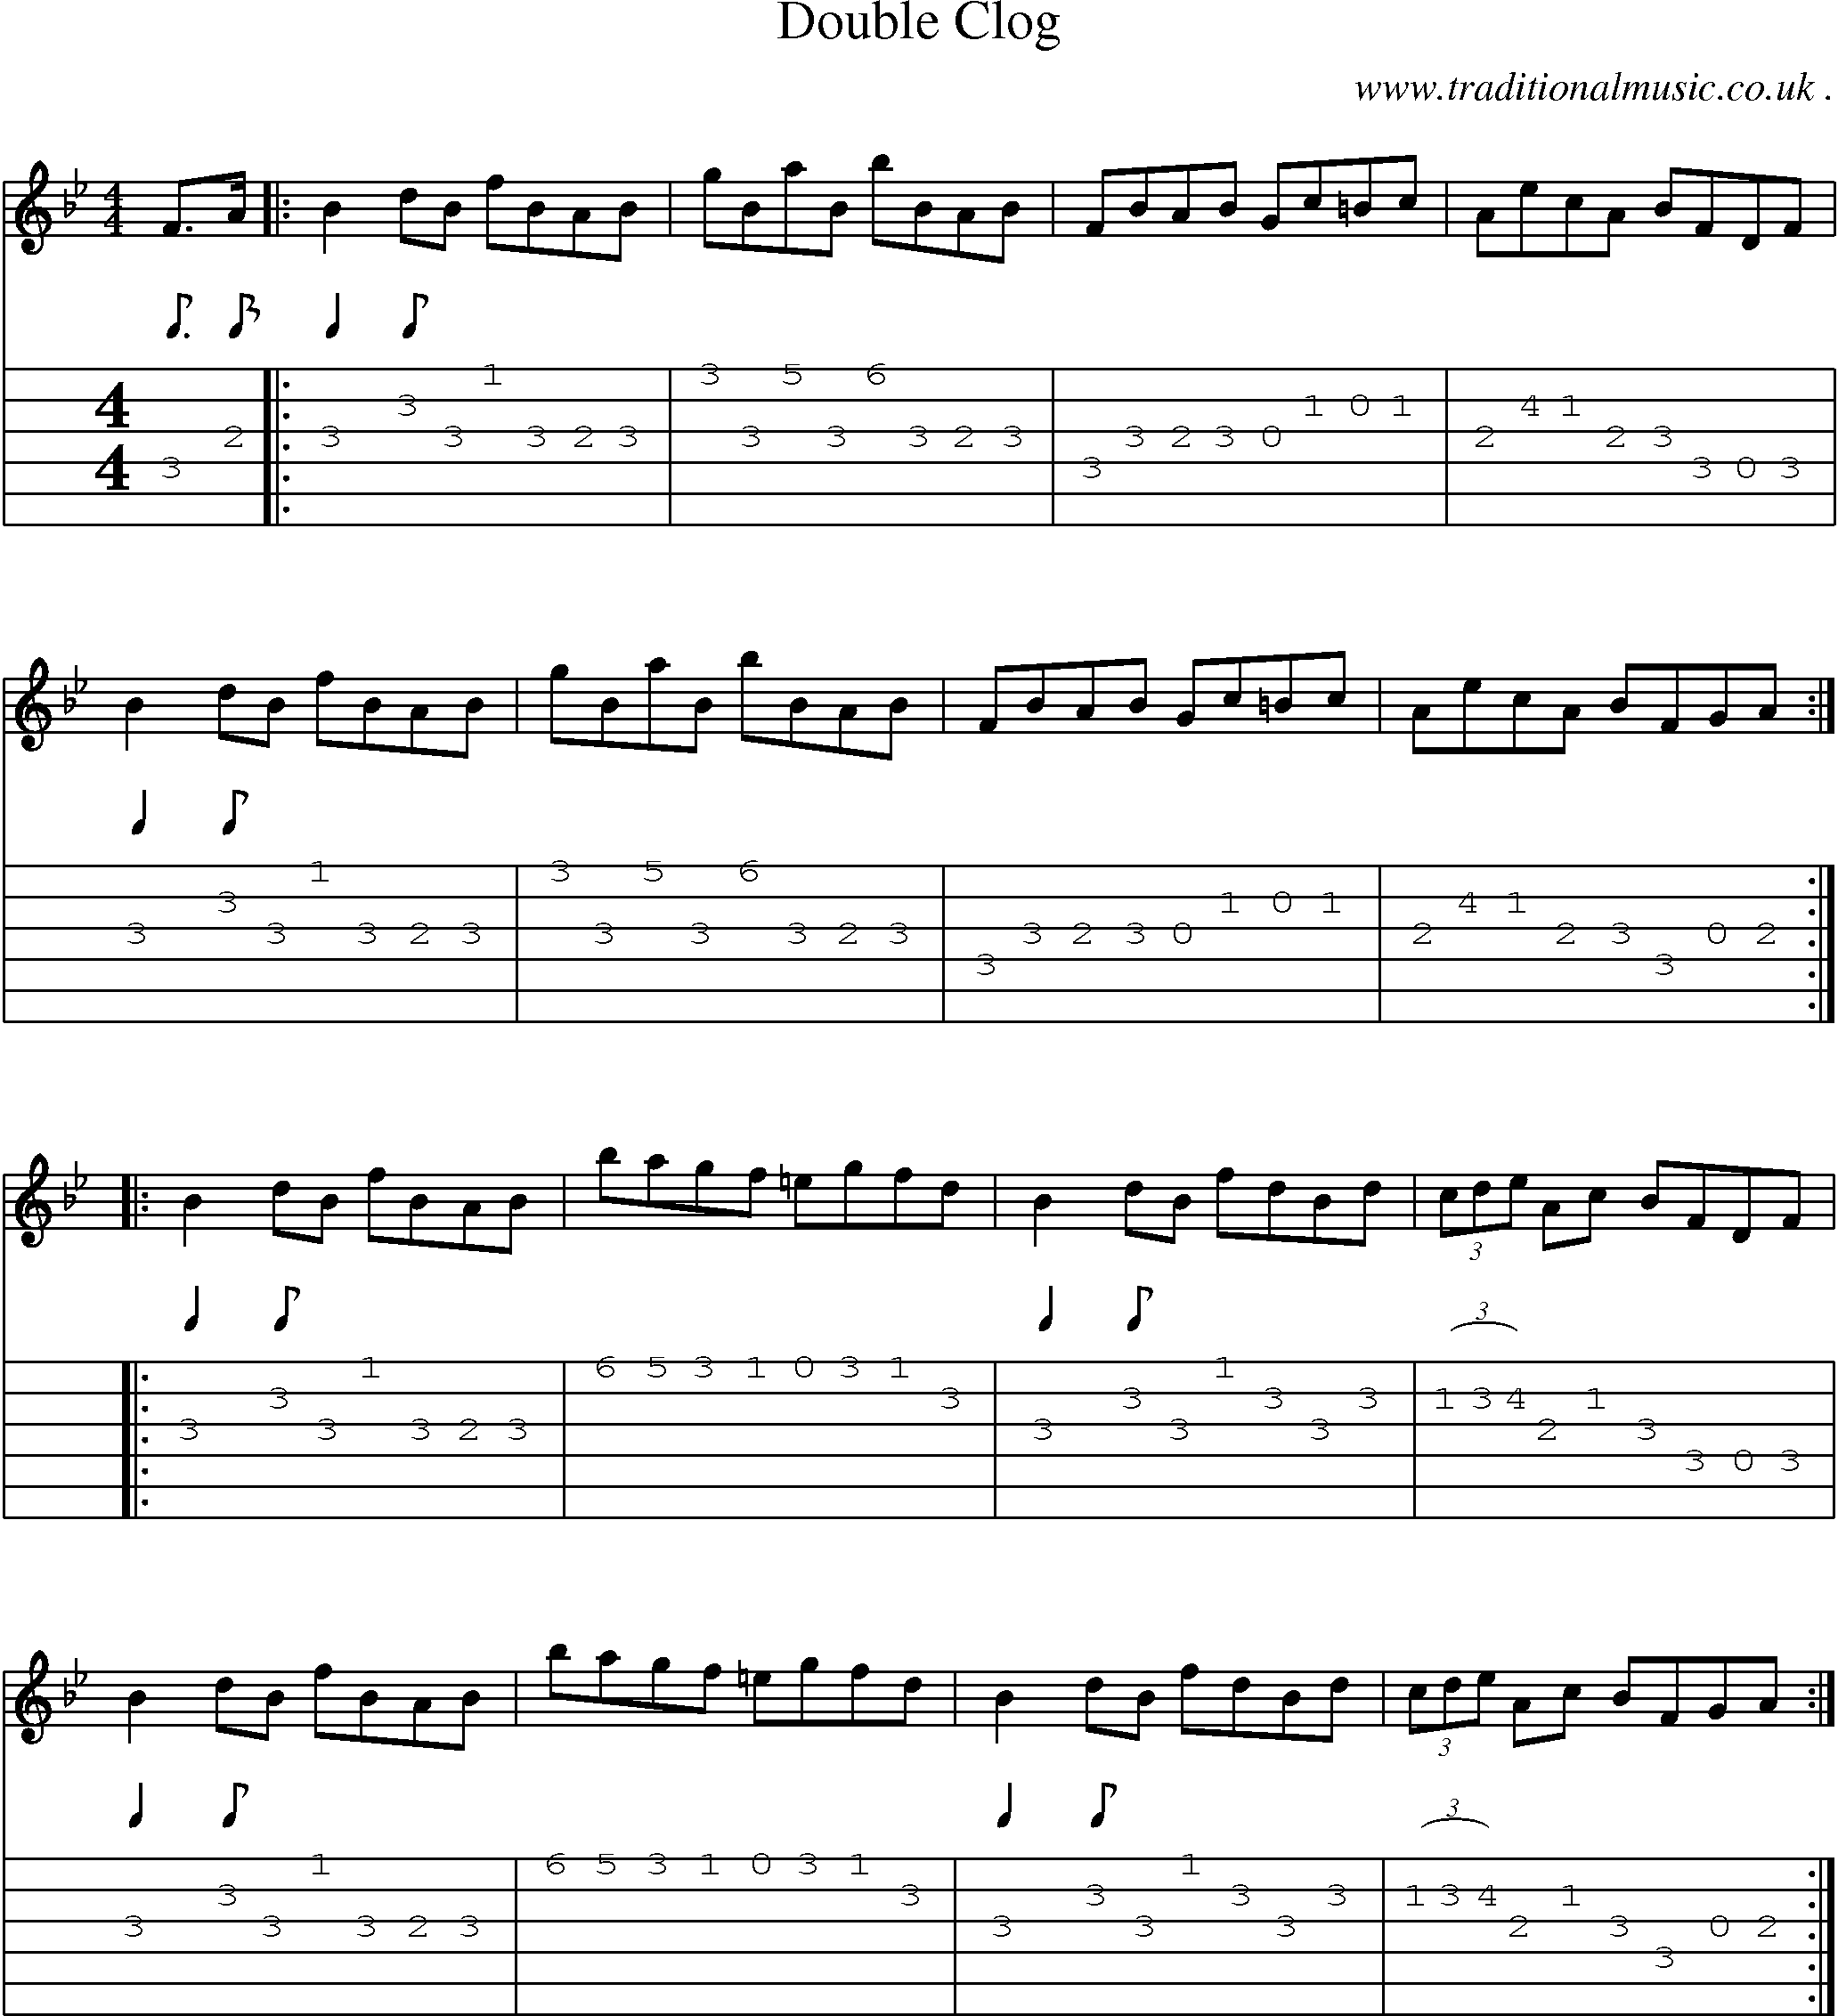 Music Score and Guitar Tabs for Double Clog